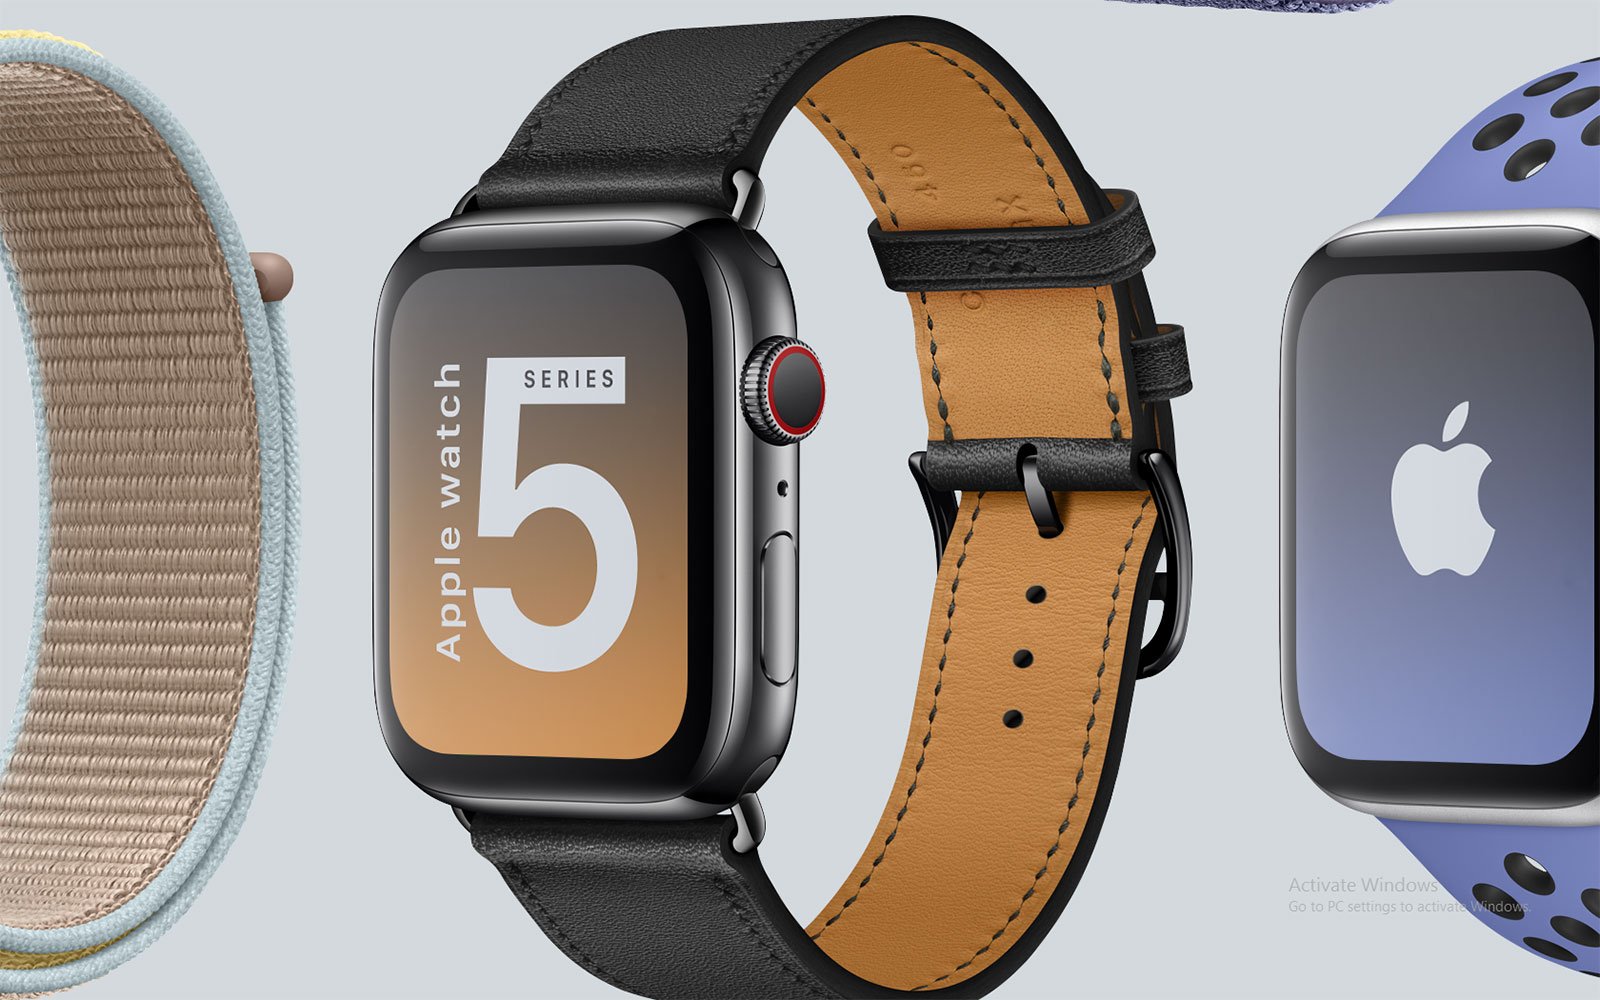 Free Apple Watch Series 5 Mockup PSD With 10 Different ...